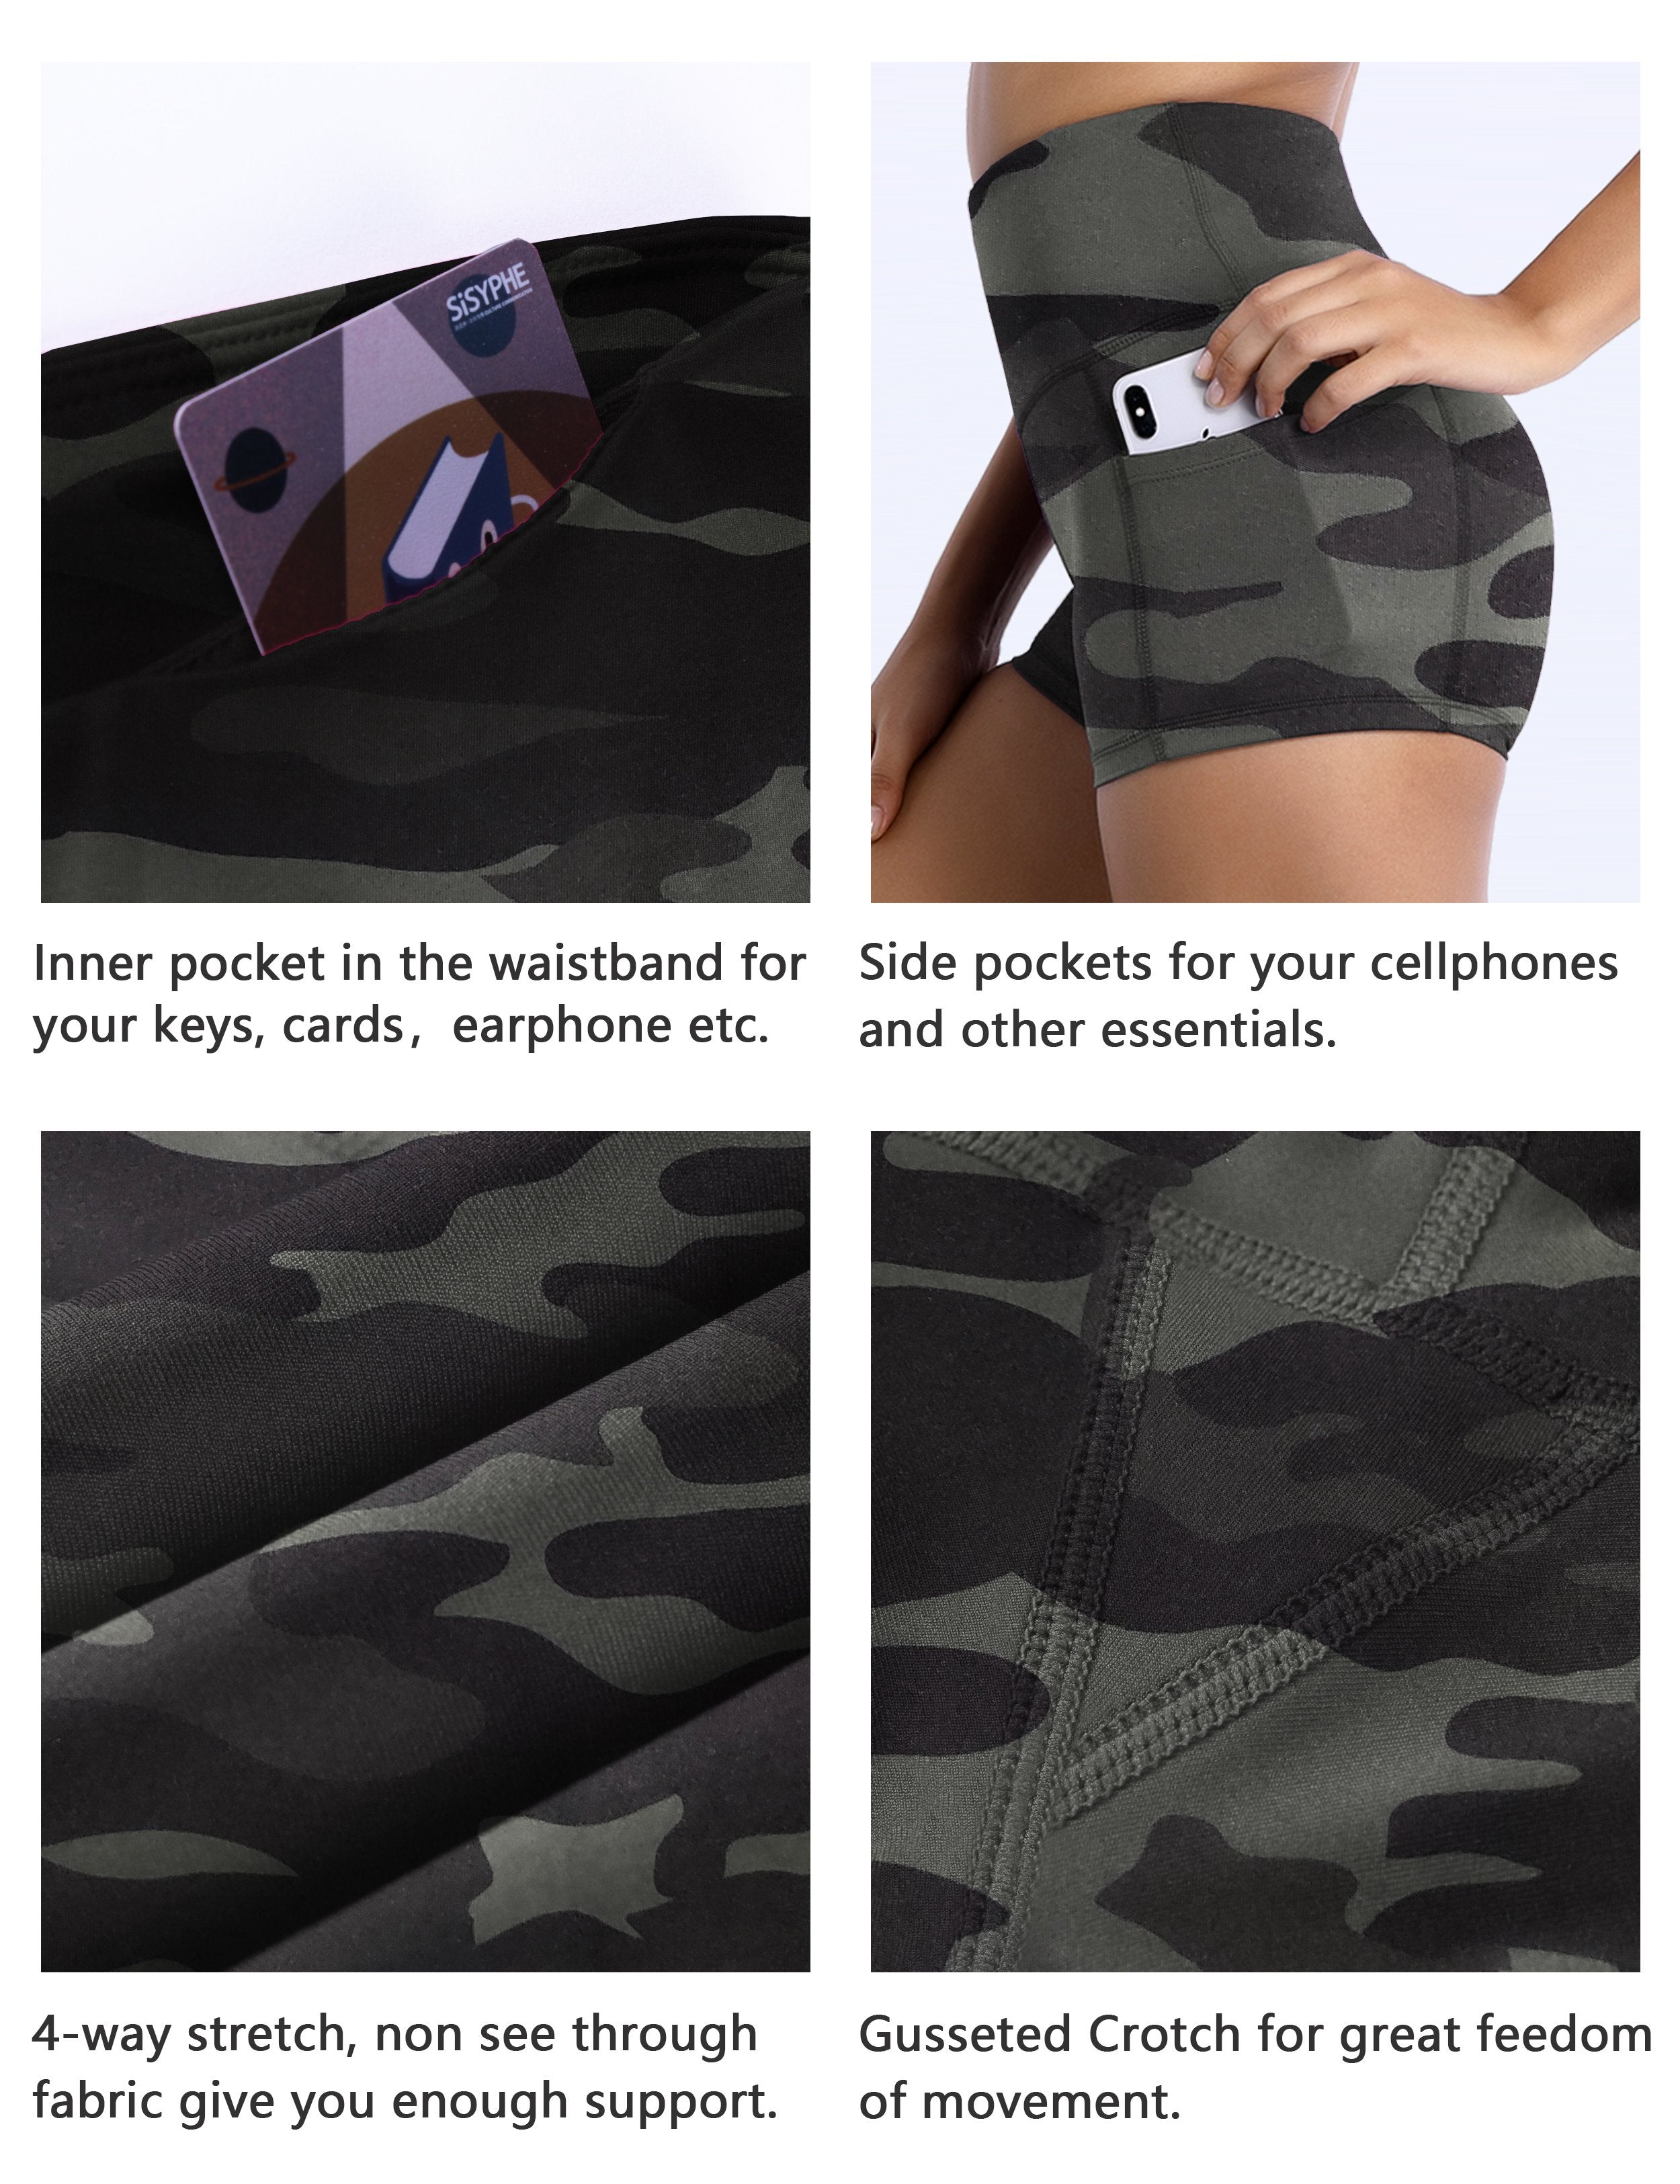 2.5" Printed Side Pockets Pilates Shorts dimgraycamo Sleek, soft, smooth and totally comfortable: our newest sexy style is here. Softest-ever fabric High elasticity High density 4-way stretch Fabric doesn't attract lint easily No see-through Moisture-wicking Machine wash 78% Polyester, 22% Spandex